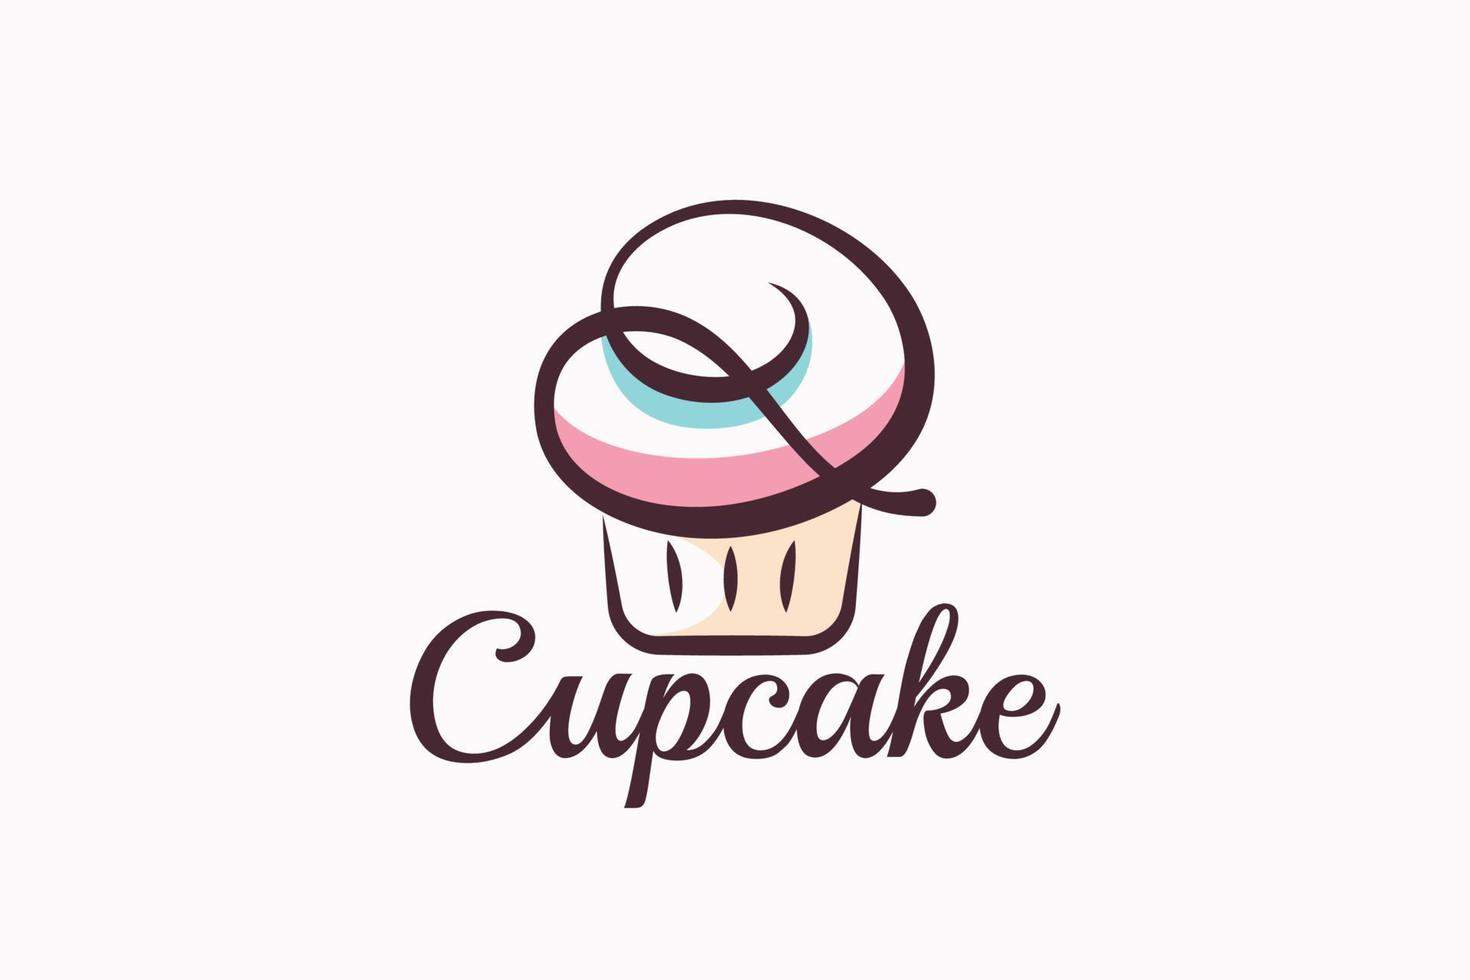 cupcake logo with a combination of stylist cupcake and letter q for any business, especially for bakeries, cakeries, cafe, etc. vector